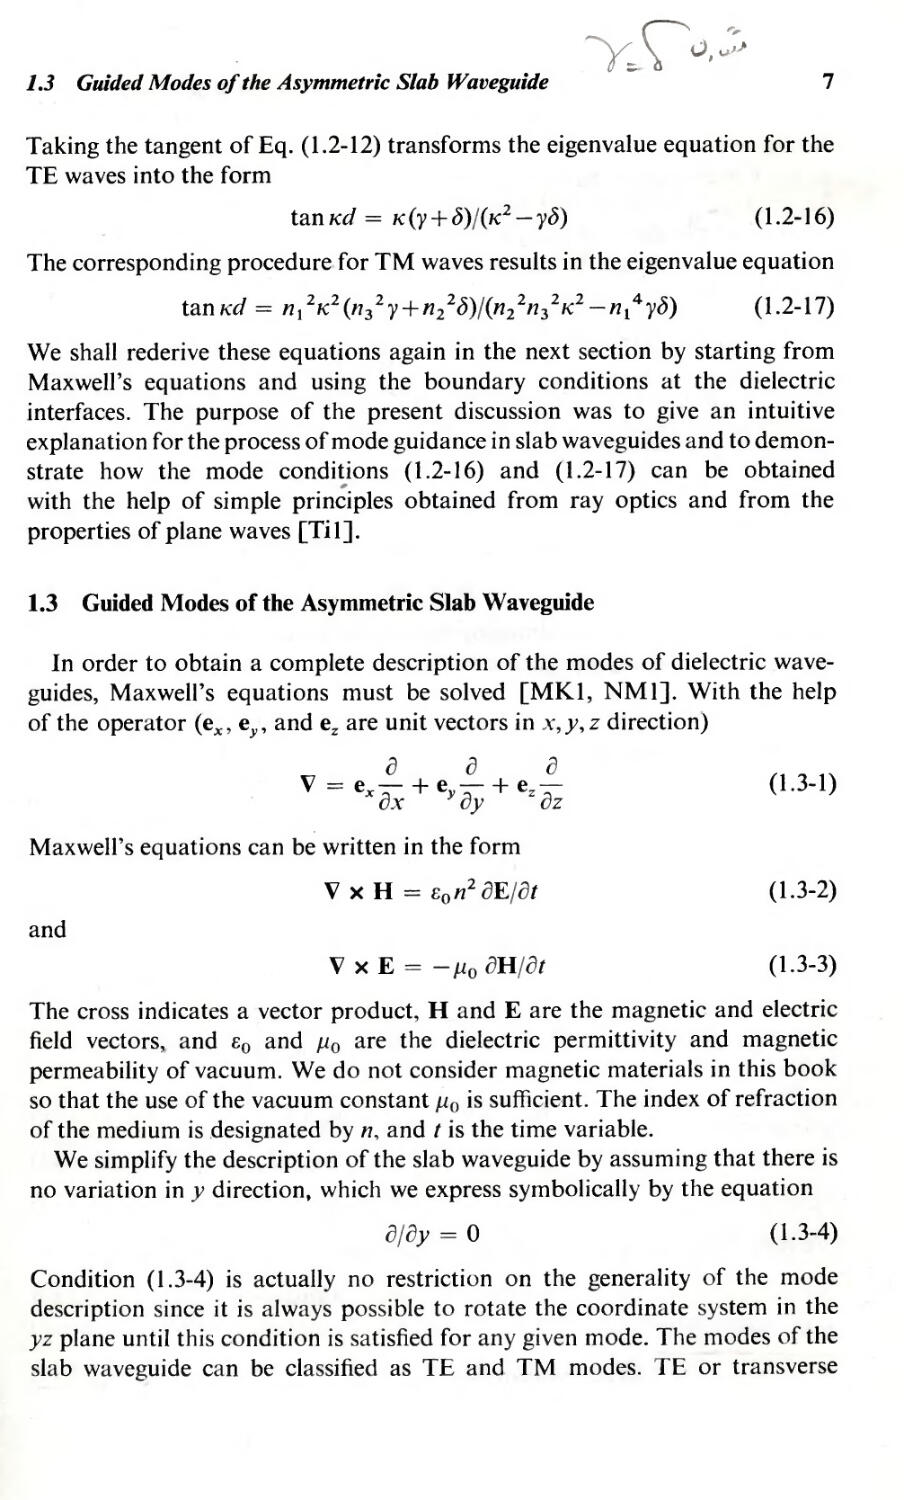 1.3 Guided Modes of the Asymmetric Slab Waveguide 7
Eigenvalue equation, 7
Maxwell’s equations, 7
Modes, 7
Refractive index, 7
7
TE modes, 7
TE waves, 7
TM modes, 7
TM waves, 7